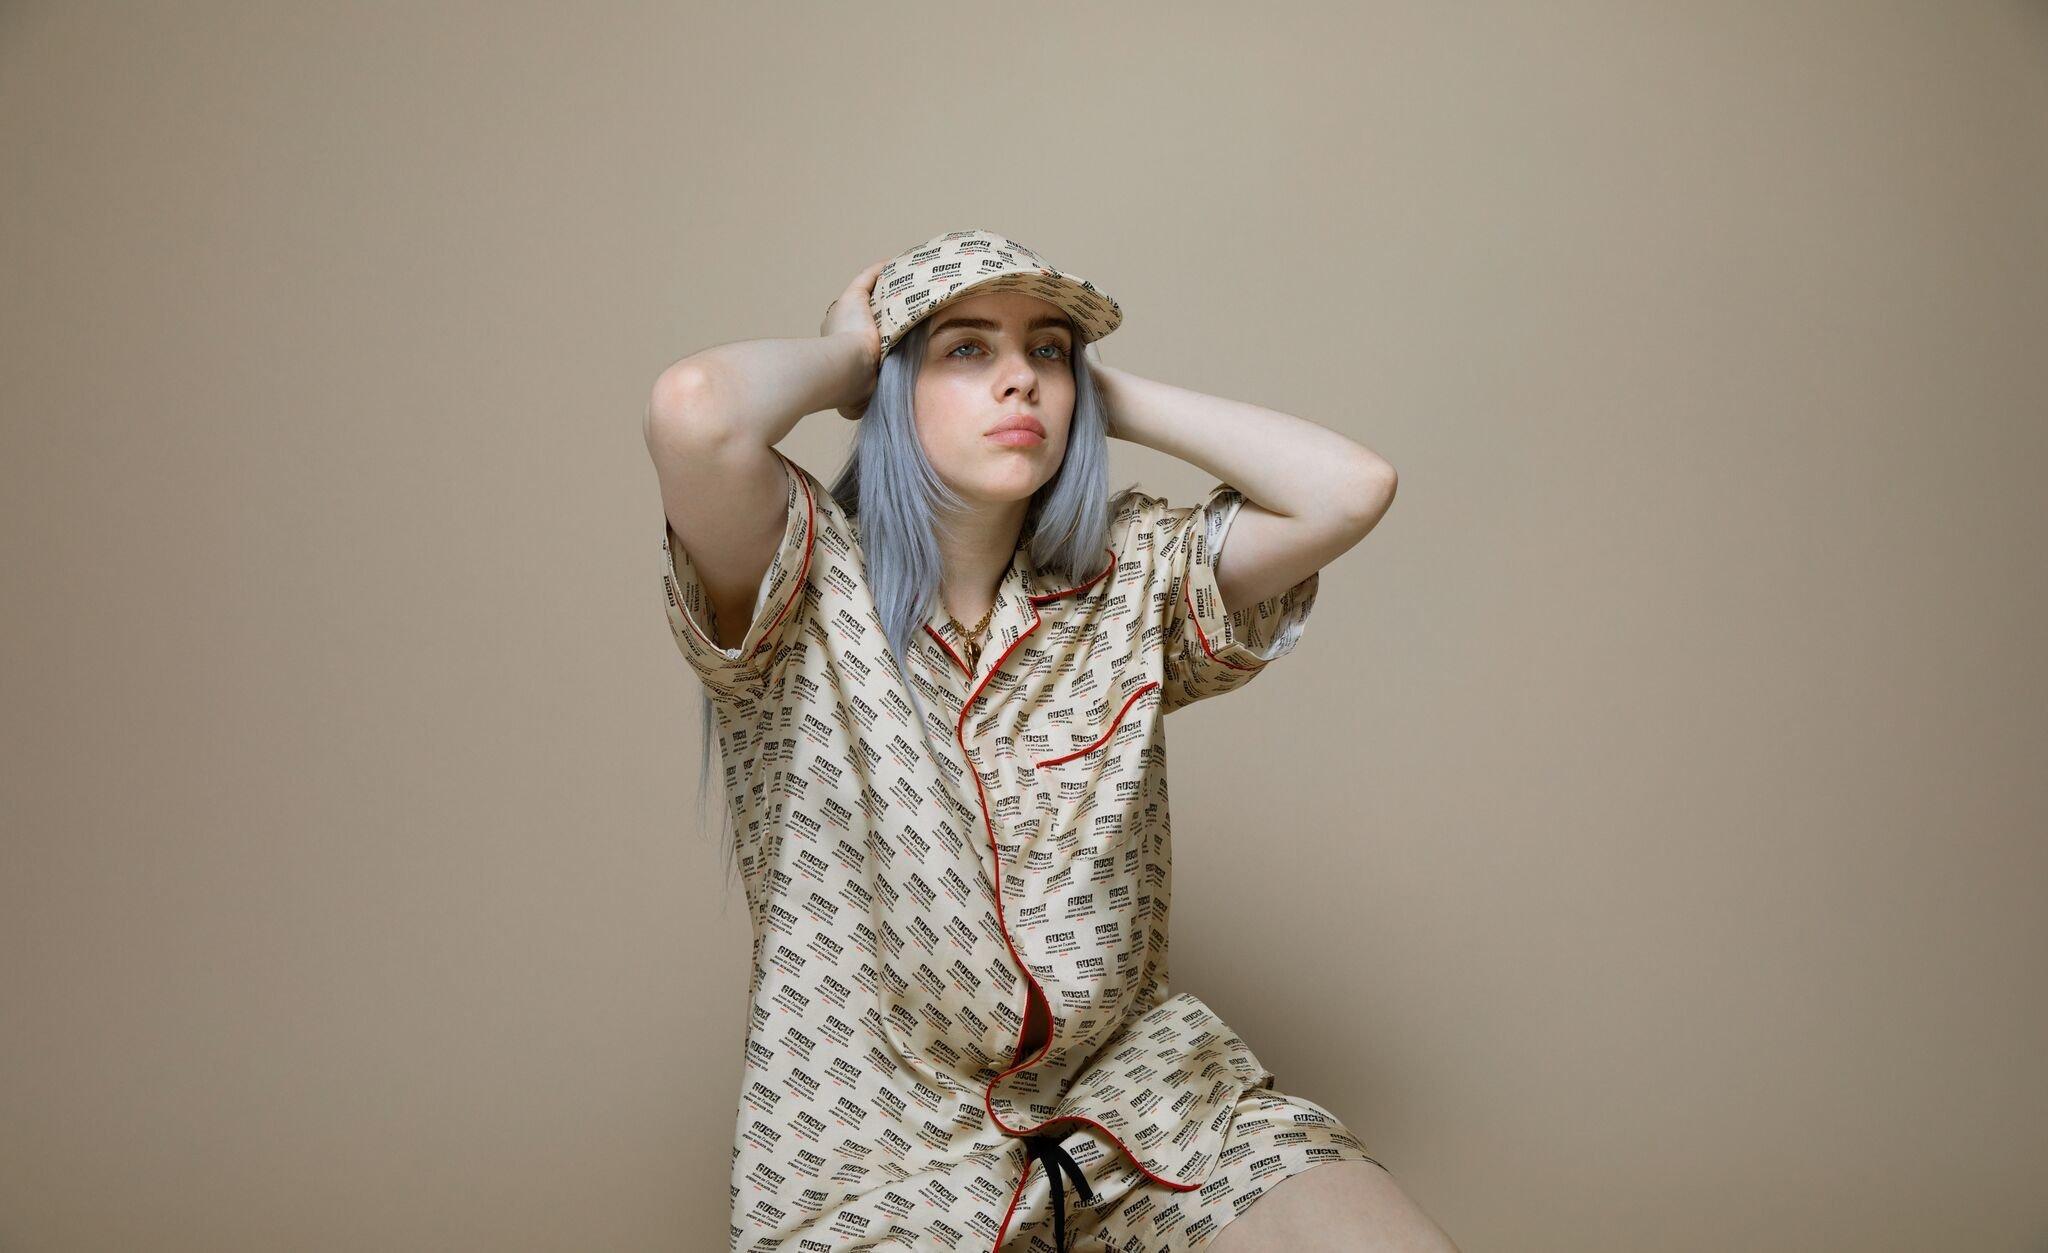 Billie Eilish and the changing pop star